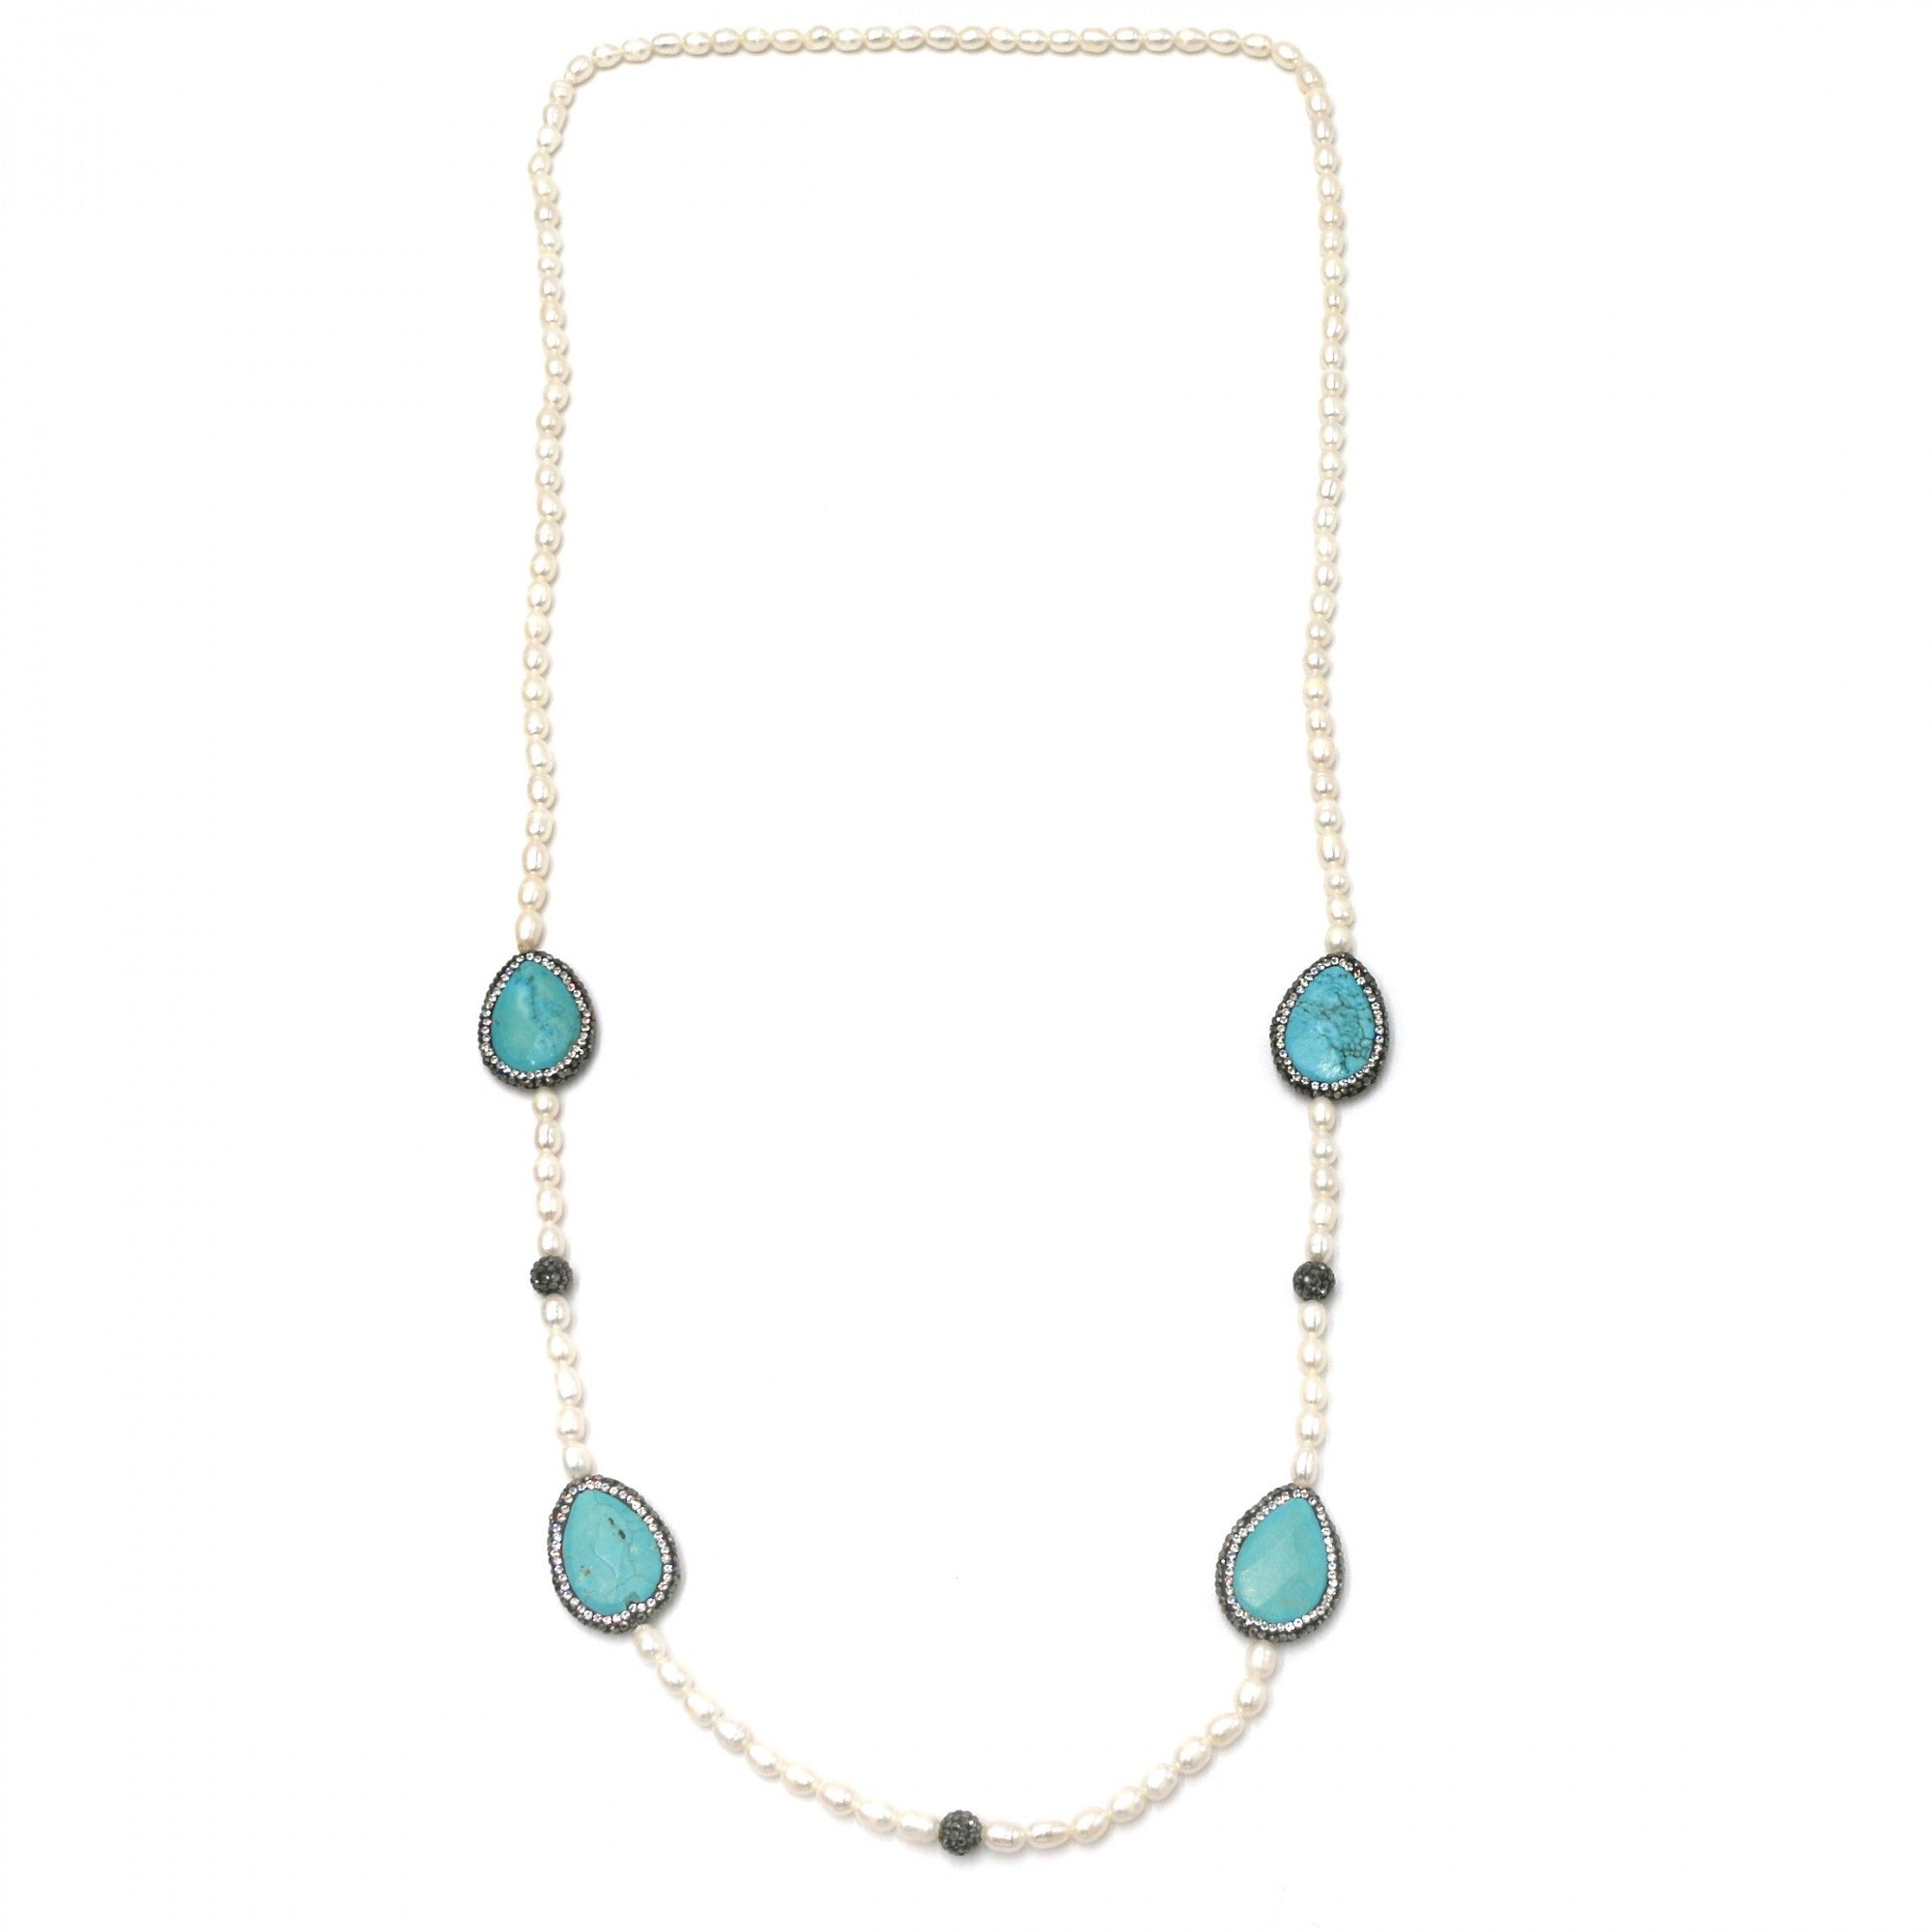 Habana Paris Long Pearl Turquoise Necklace - 0